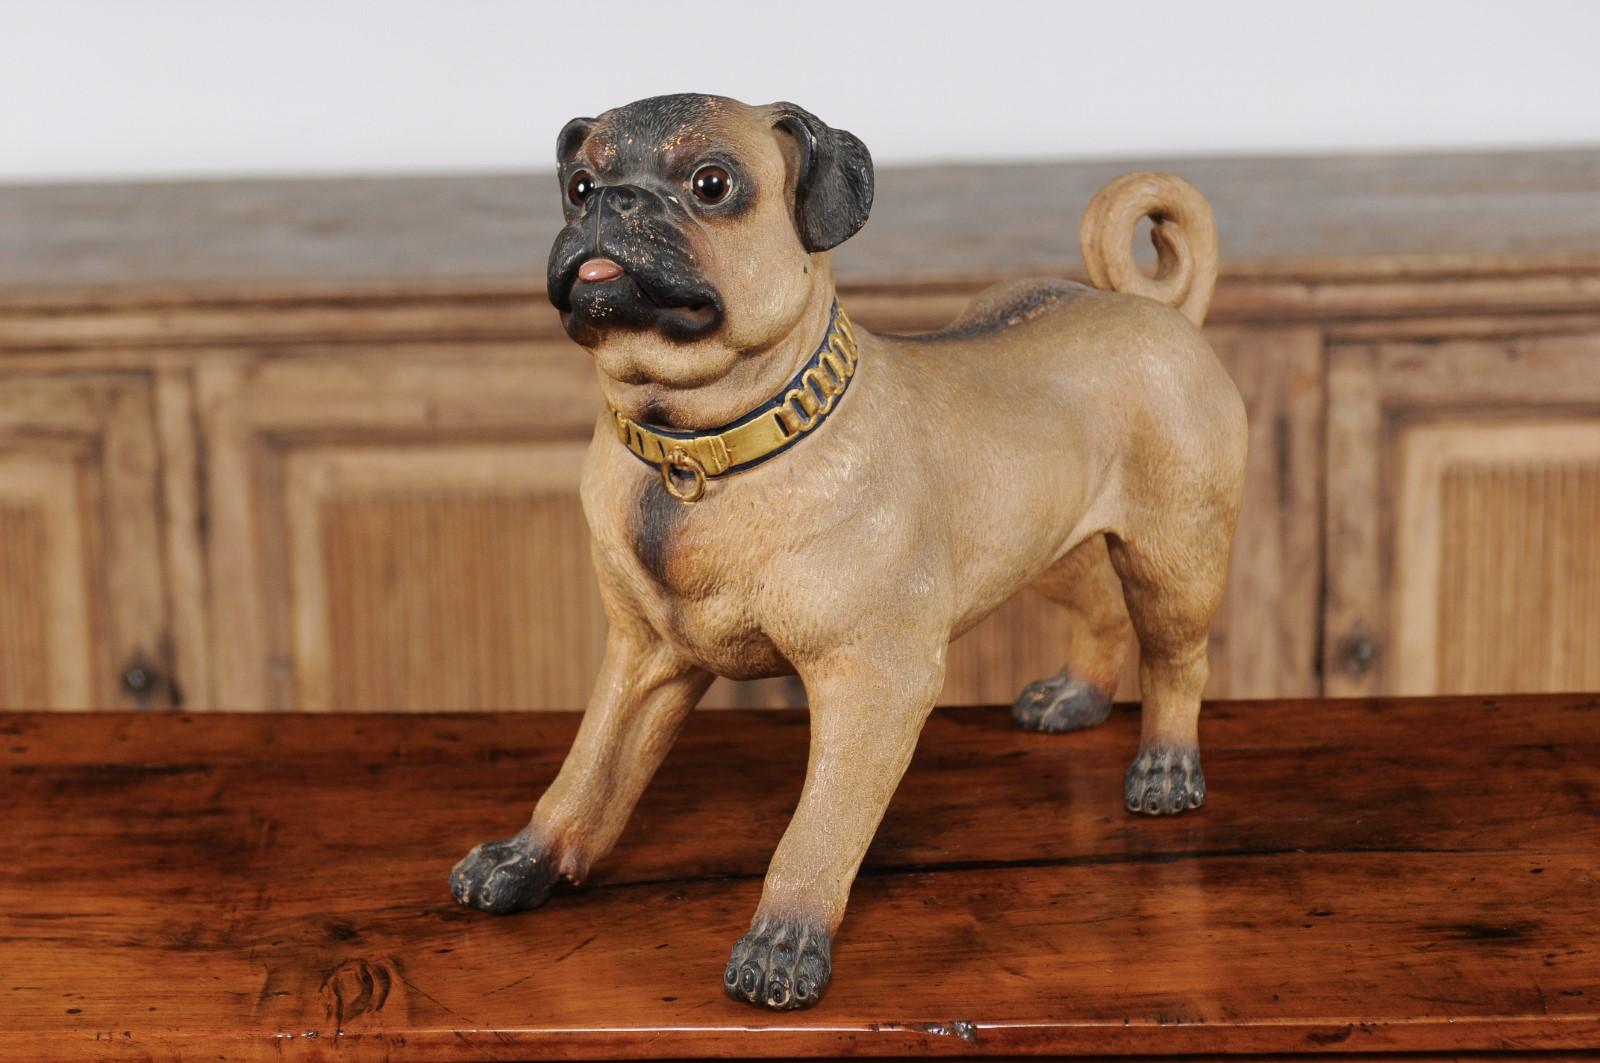 A German painted terracotta pug sculpture from the early 20th century, with gilded collar and playful attitude. This adorable German animal sculpture melts our hearts with its lively depiction of a pug, standing on his four paws. His attention is